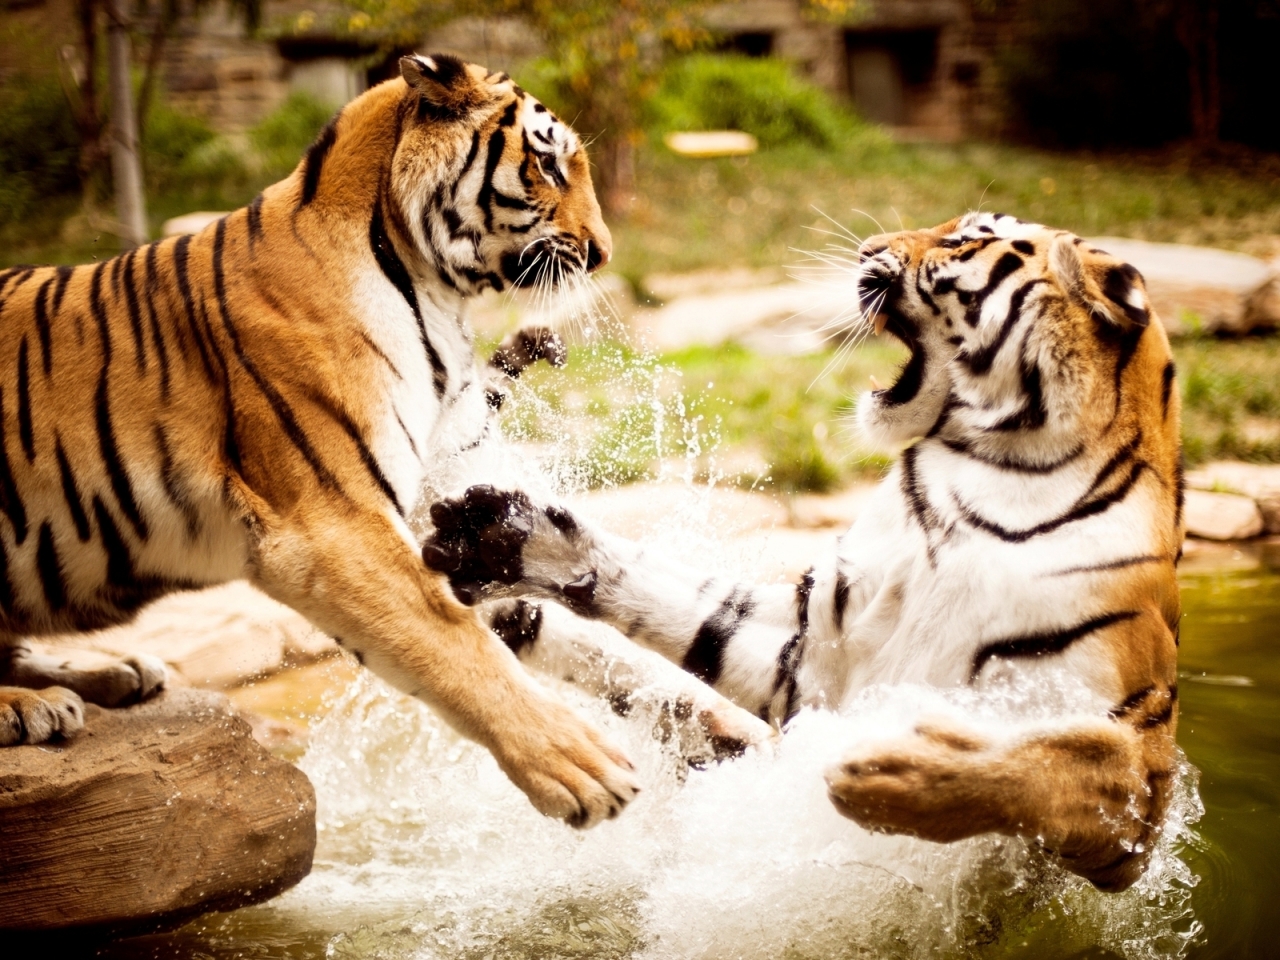 Tigers Fight for 1280 x 960 resolution